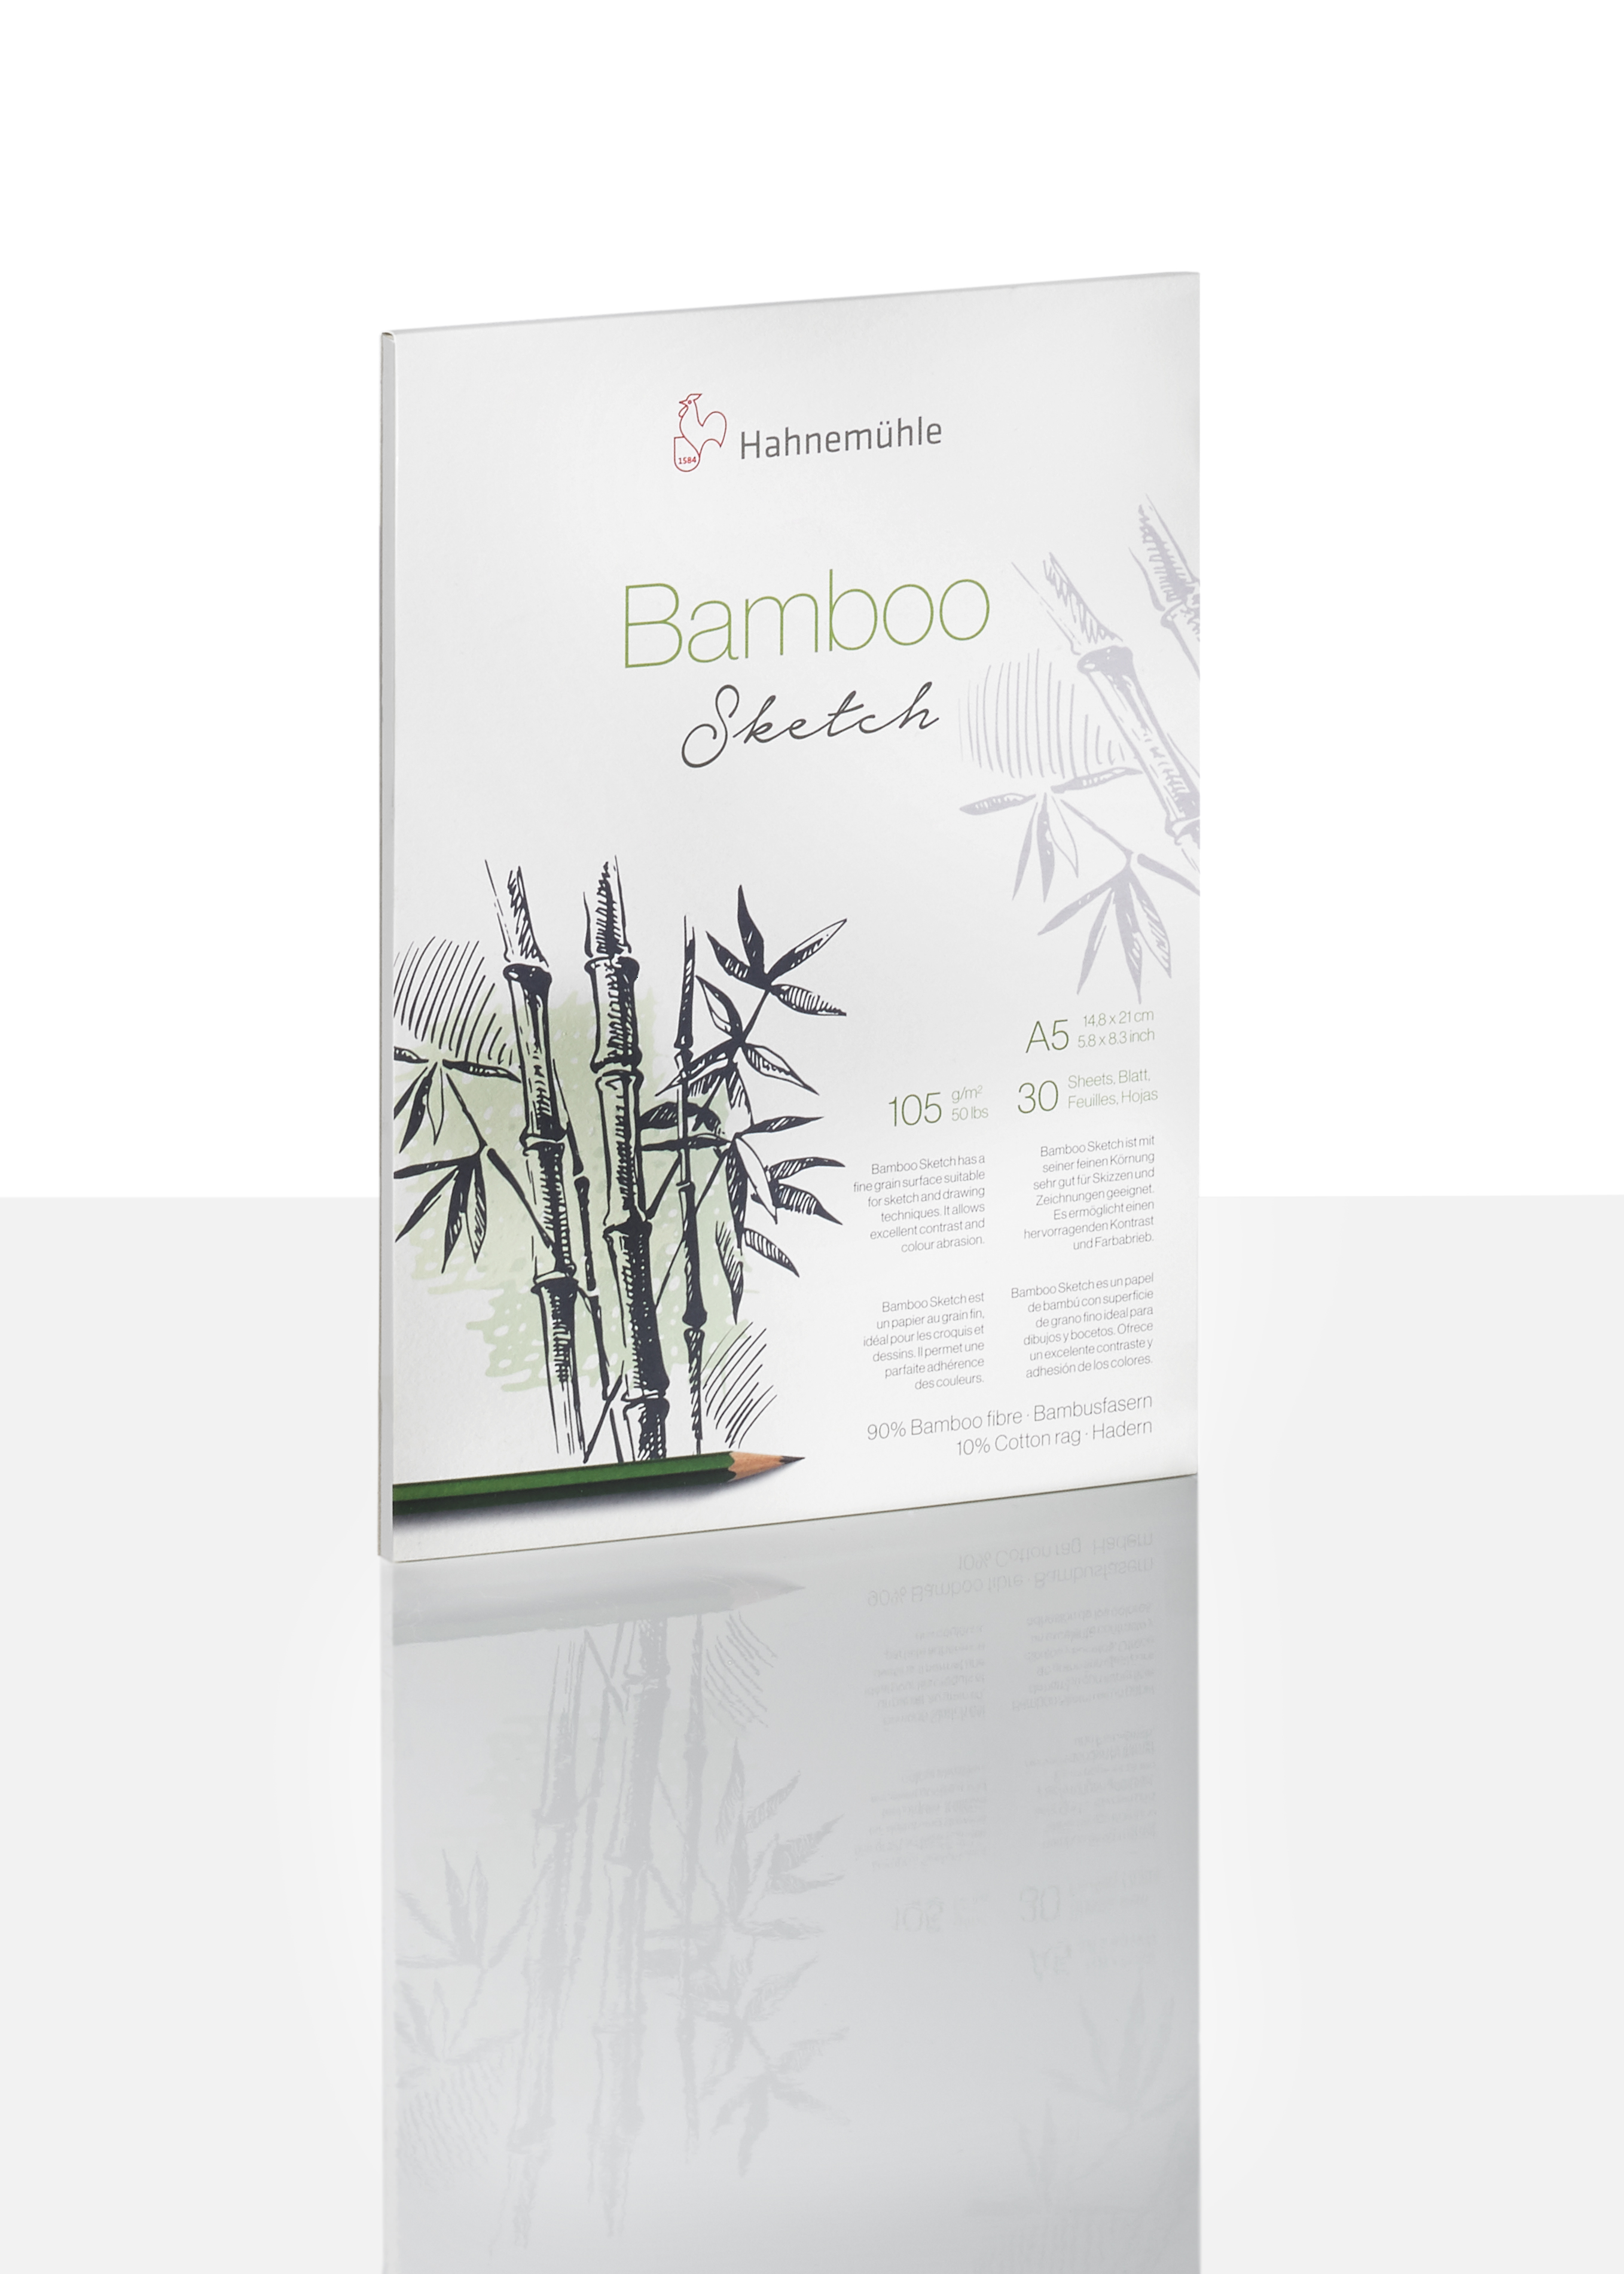 Hahnemuehle_Bamboo_Sketch